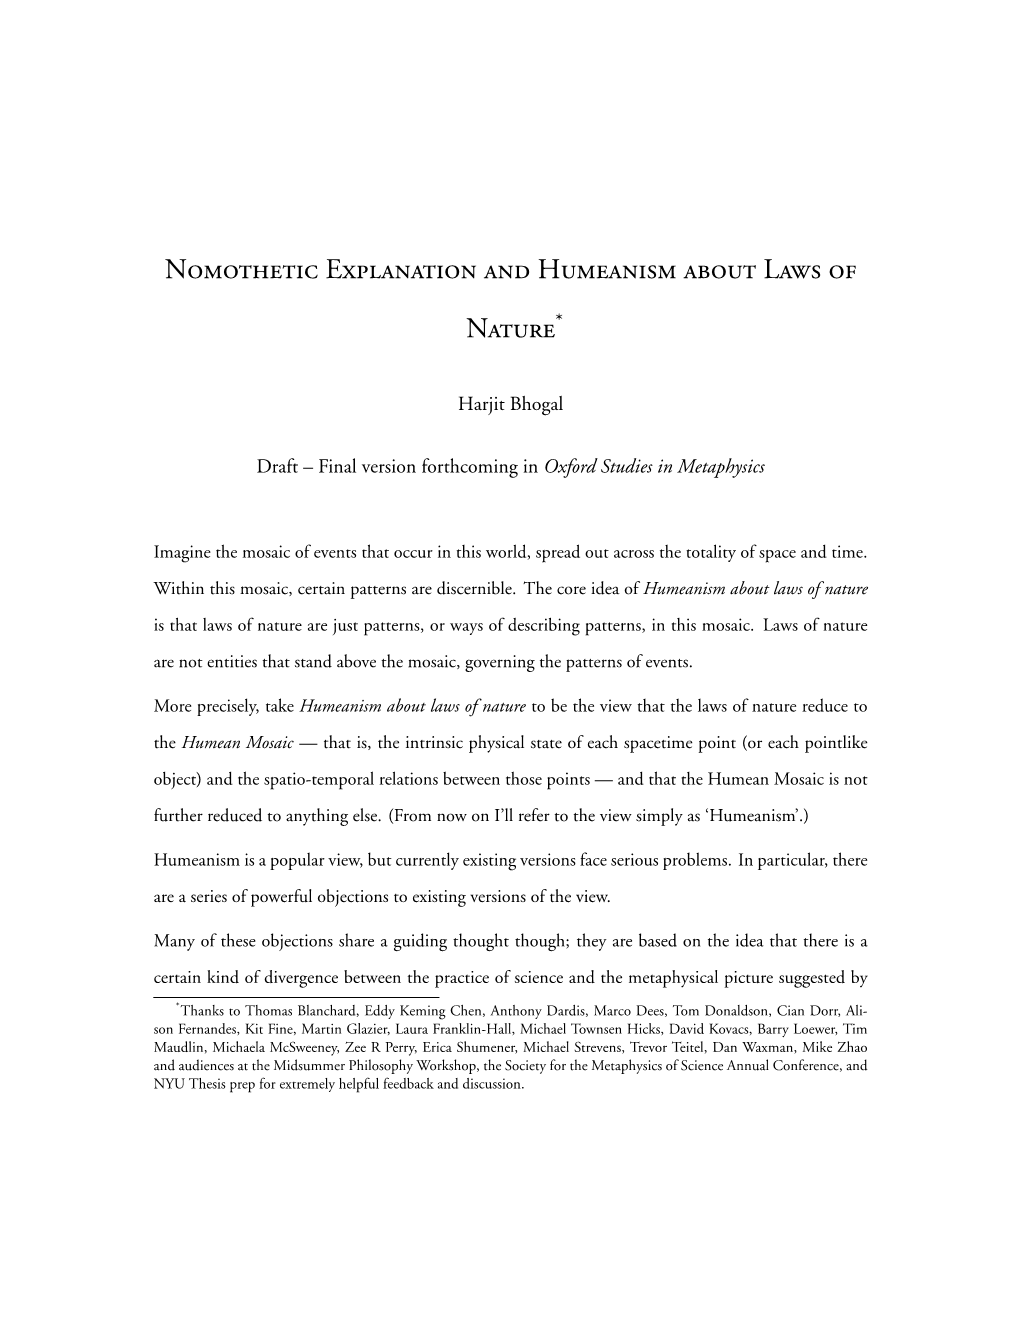 Nomothetic Explanation and Humeanism About Laws of Nature*